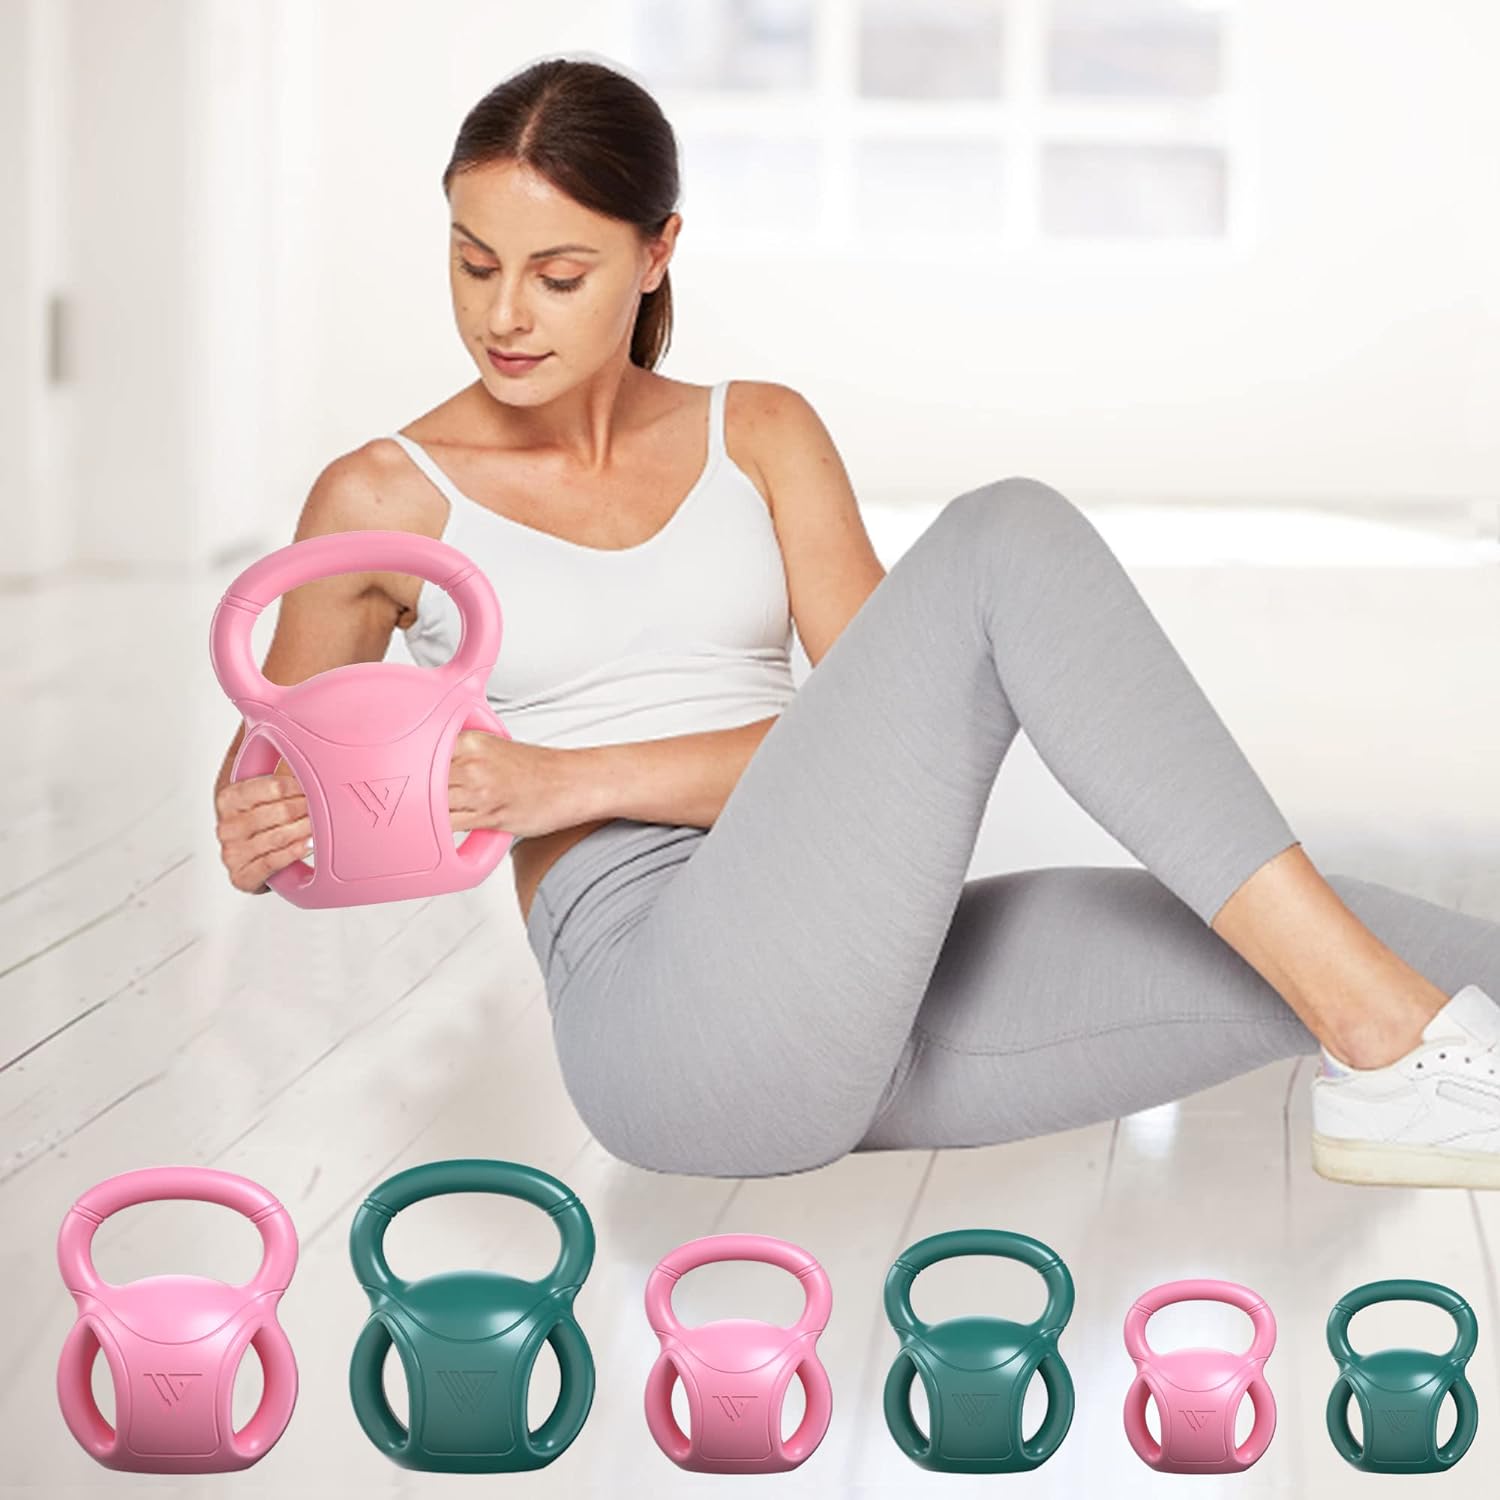 2023 UPGRADE THREE-HANDLE KETTLEBELL WEIGHT: Ergonomic three-handle kettlebell design for Russian Twists Core Exercise, Weightlifting and Core Training.